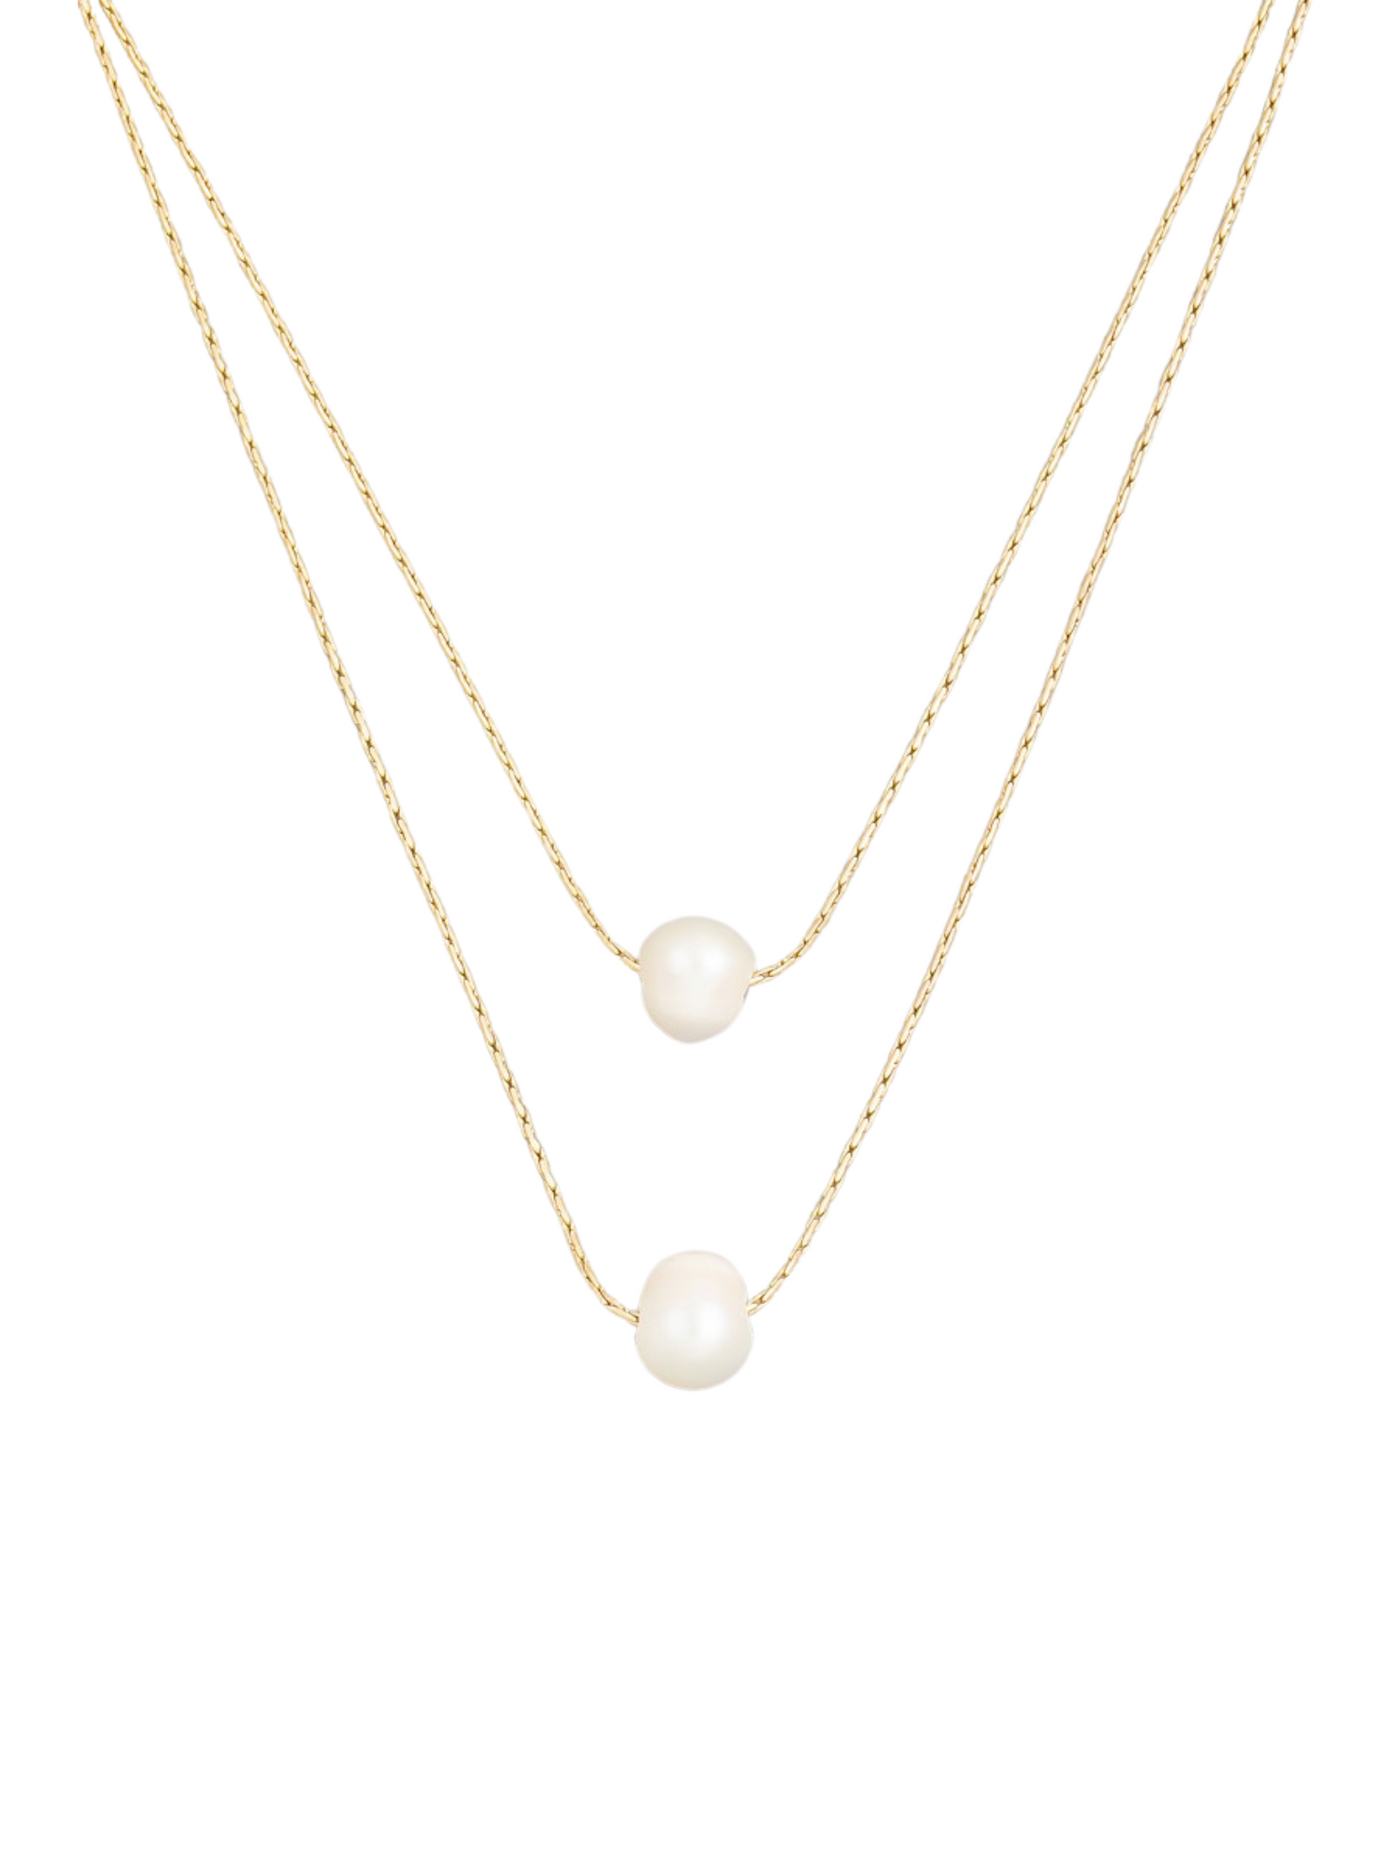 Two Layered Double Pearl Necklace